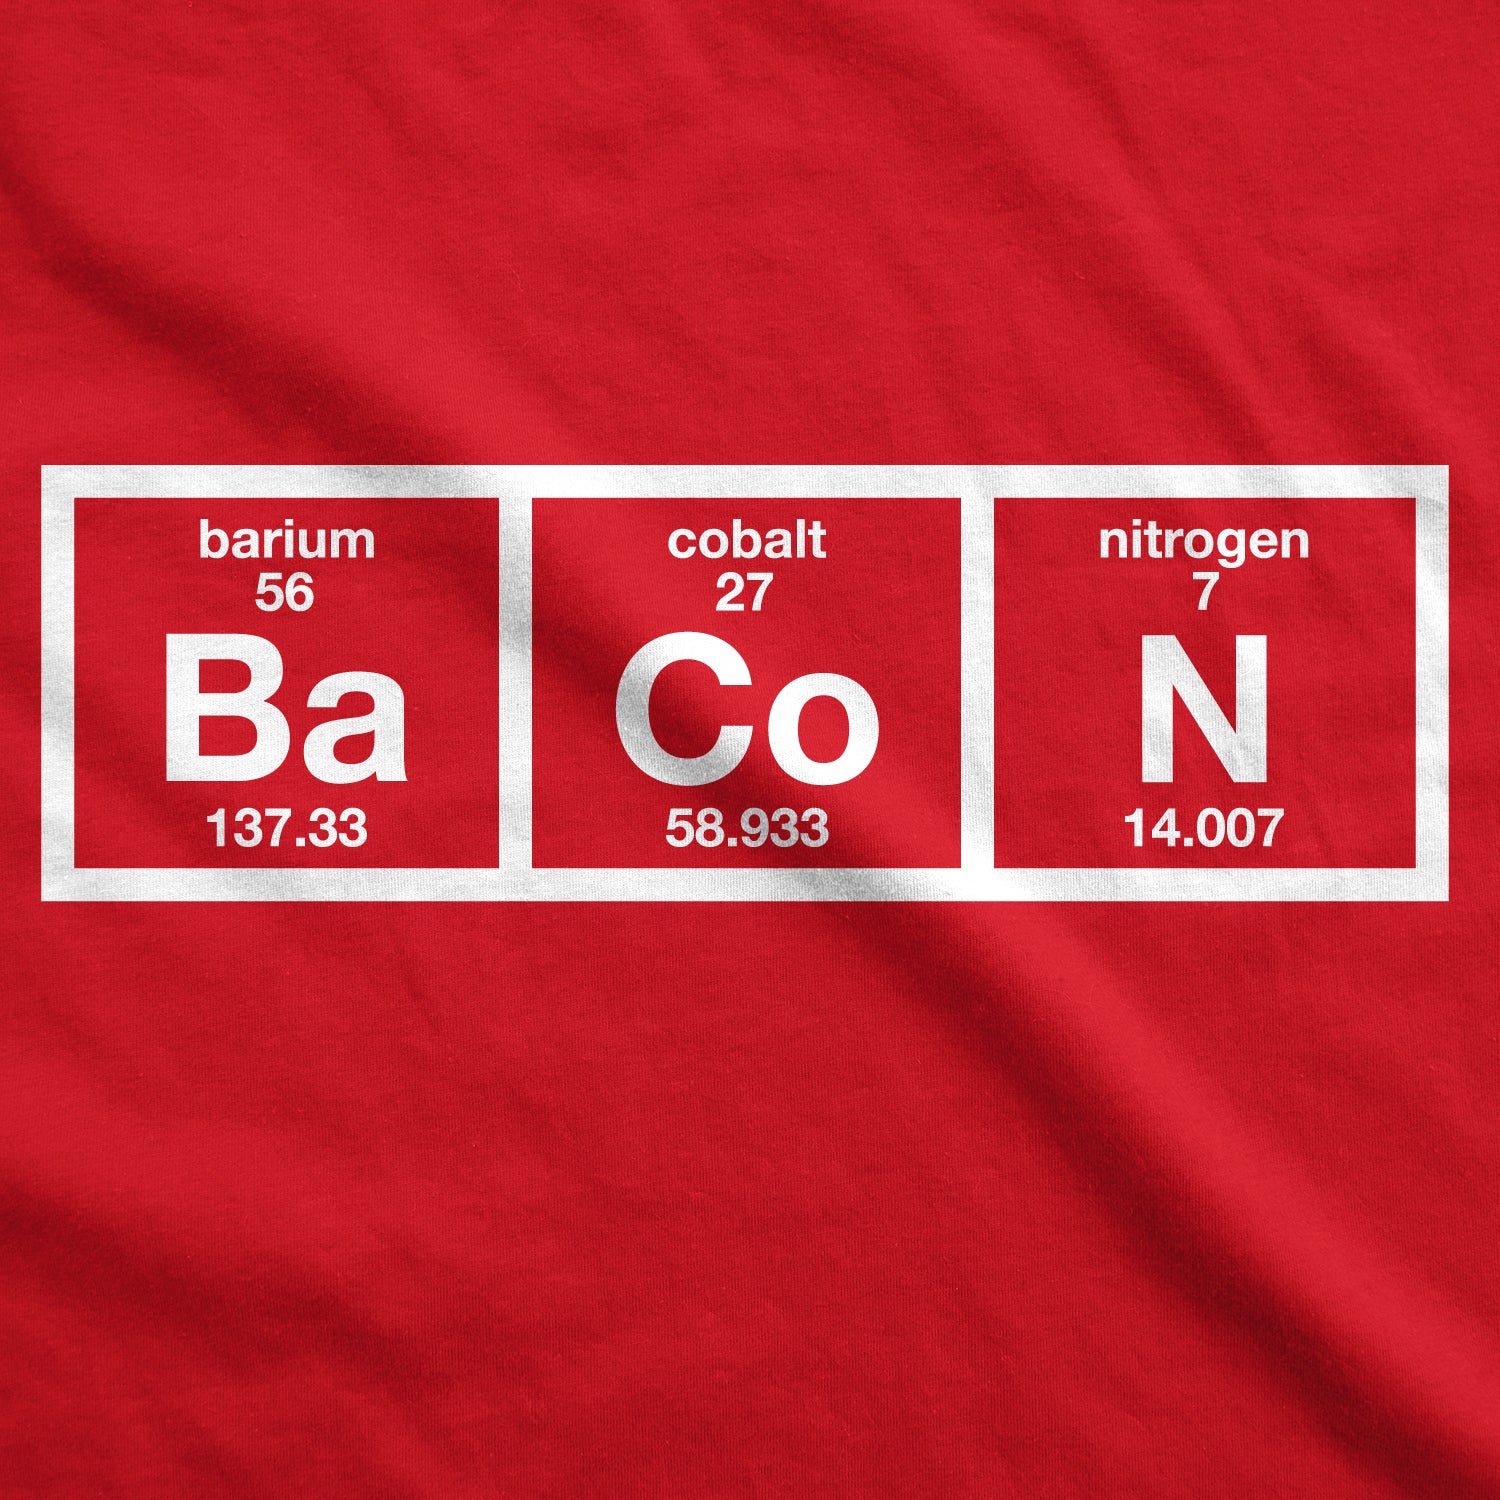 Funny Chemistry Of Bacon Womens T Shirt Nerdy Science Food Tee